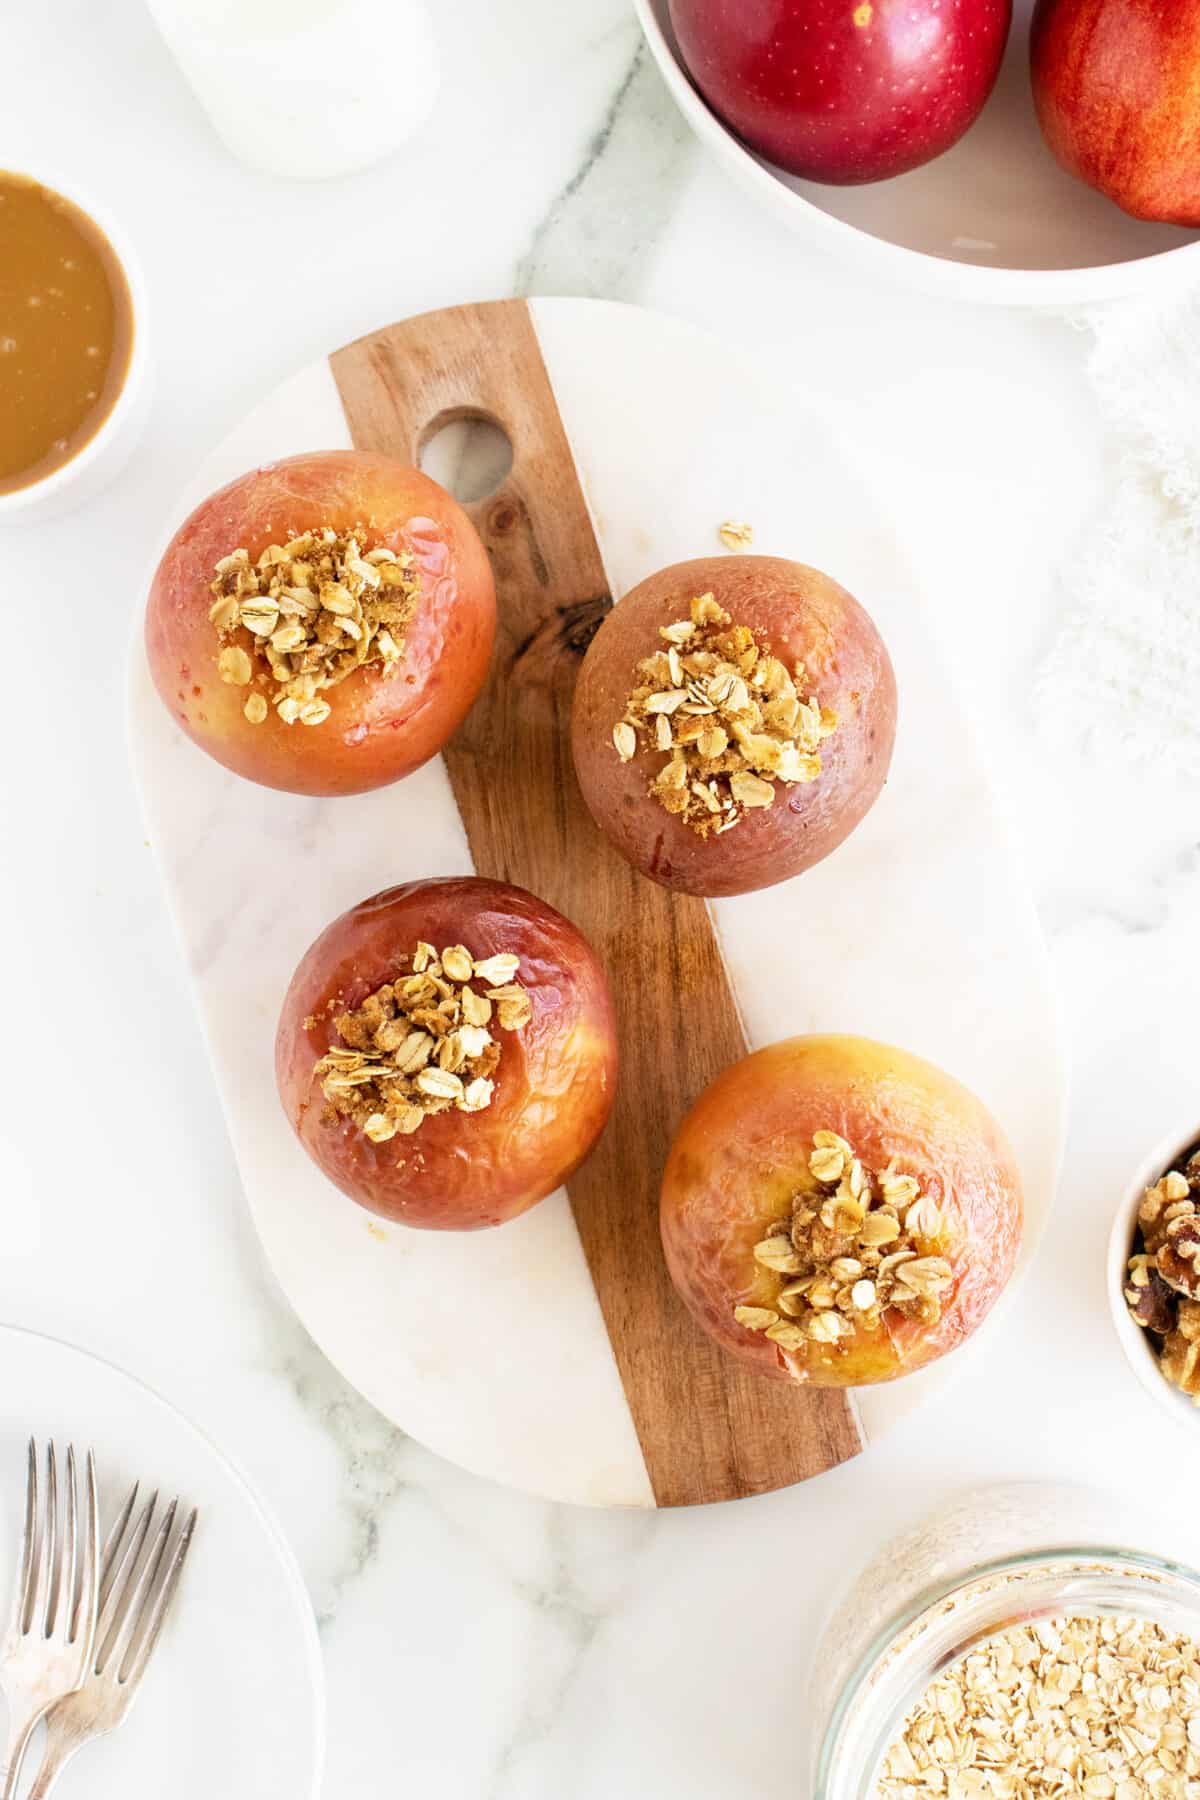 Baked apples on a cutting board